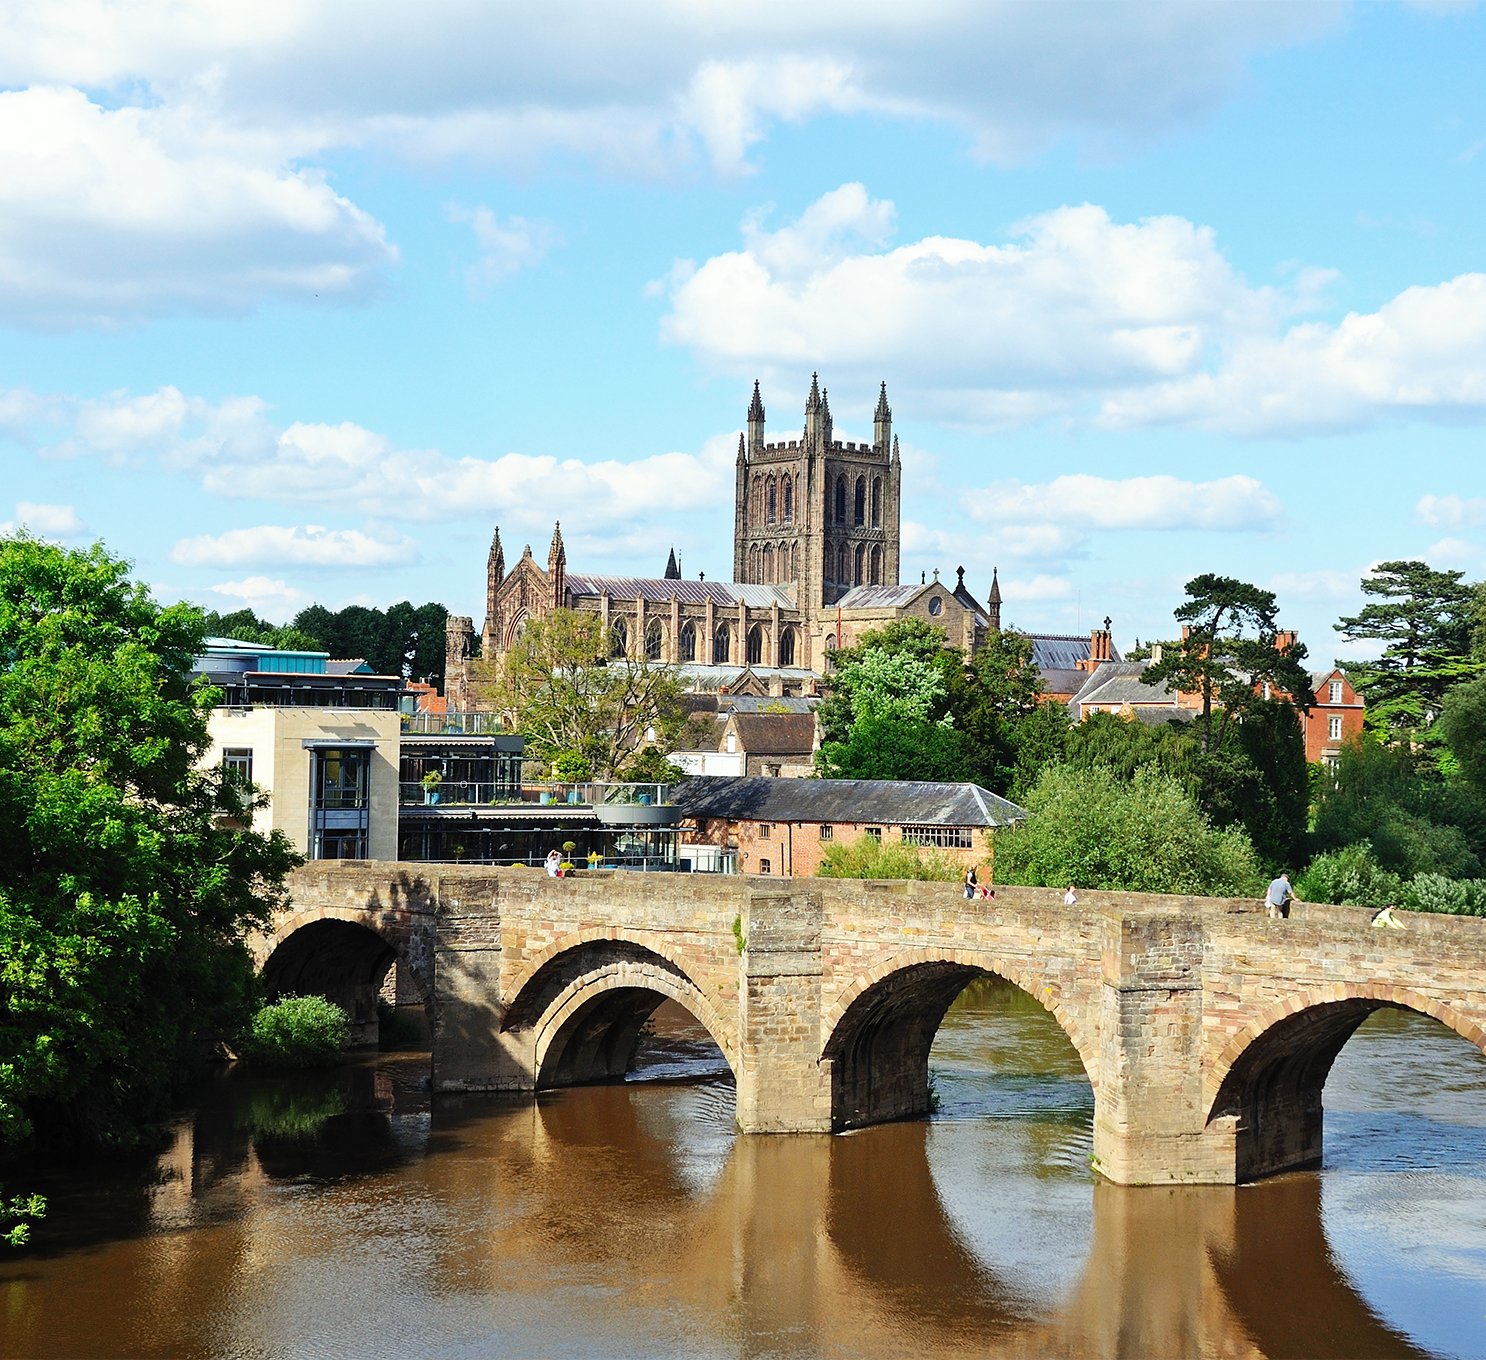 View of the Cathedral, the Wye Bridge and the River Wye in Hereford